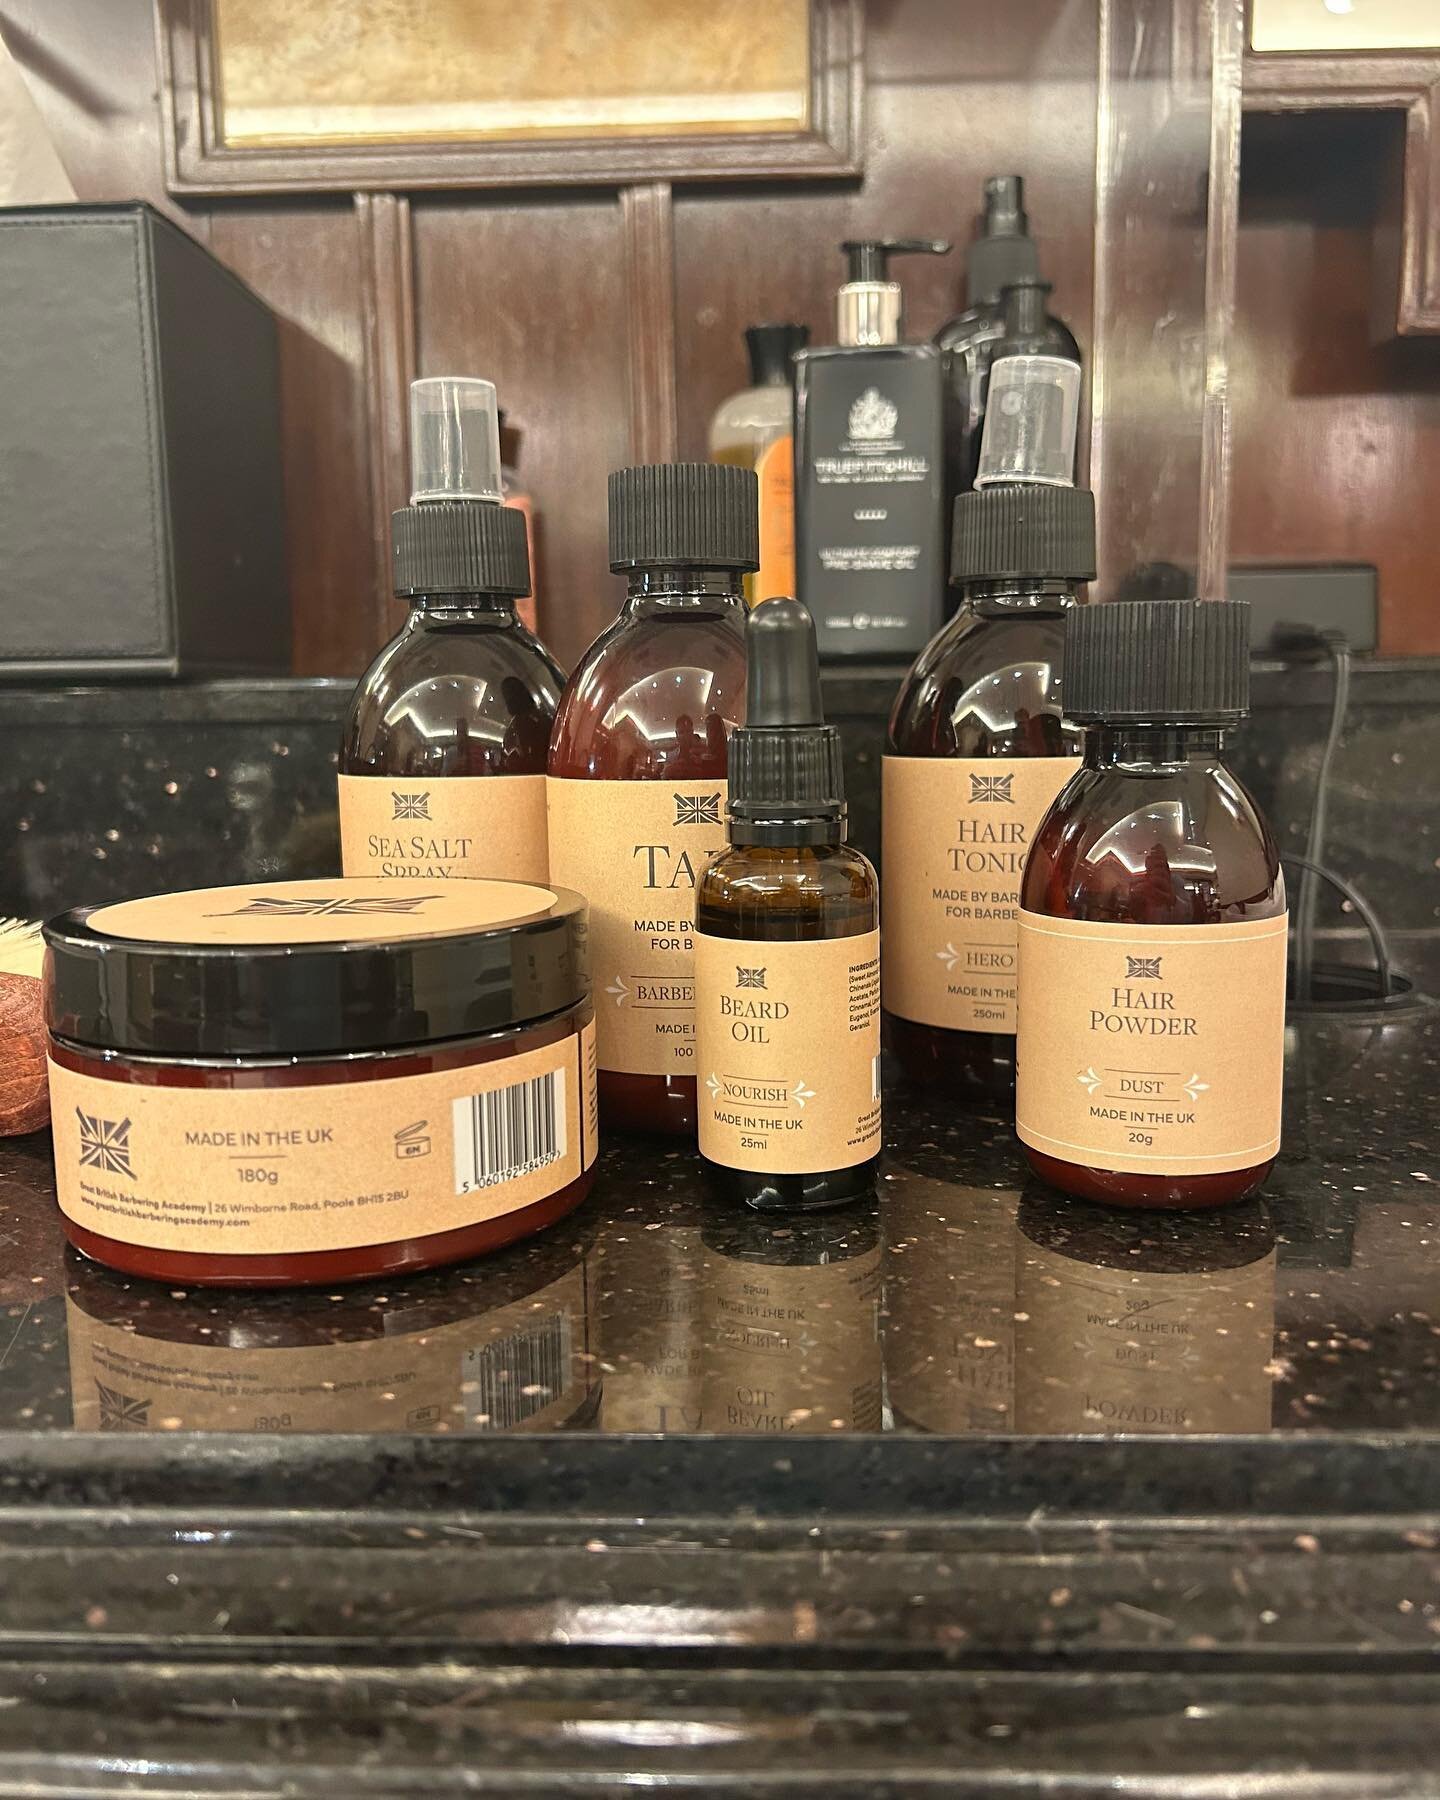 The full range of GBBA products was being used at todays training session at the @mo_hkg. @britishmasterbarbers @miketayloreducation 
One of the best barbershops in the world deserve the best!! #barberlove #Barberlife #barber #menshairdressing #mensg